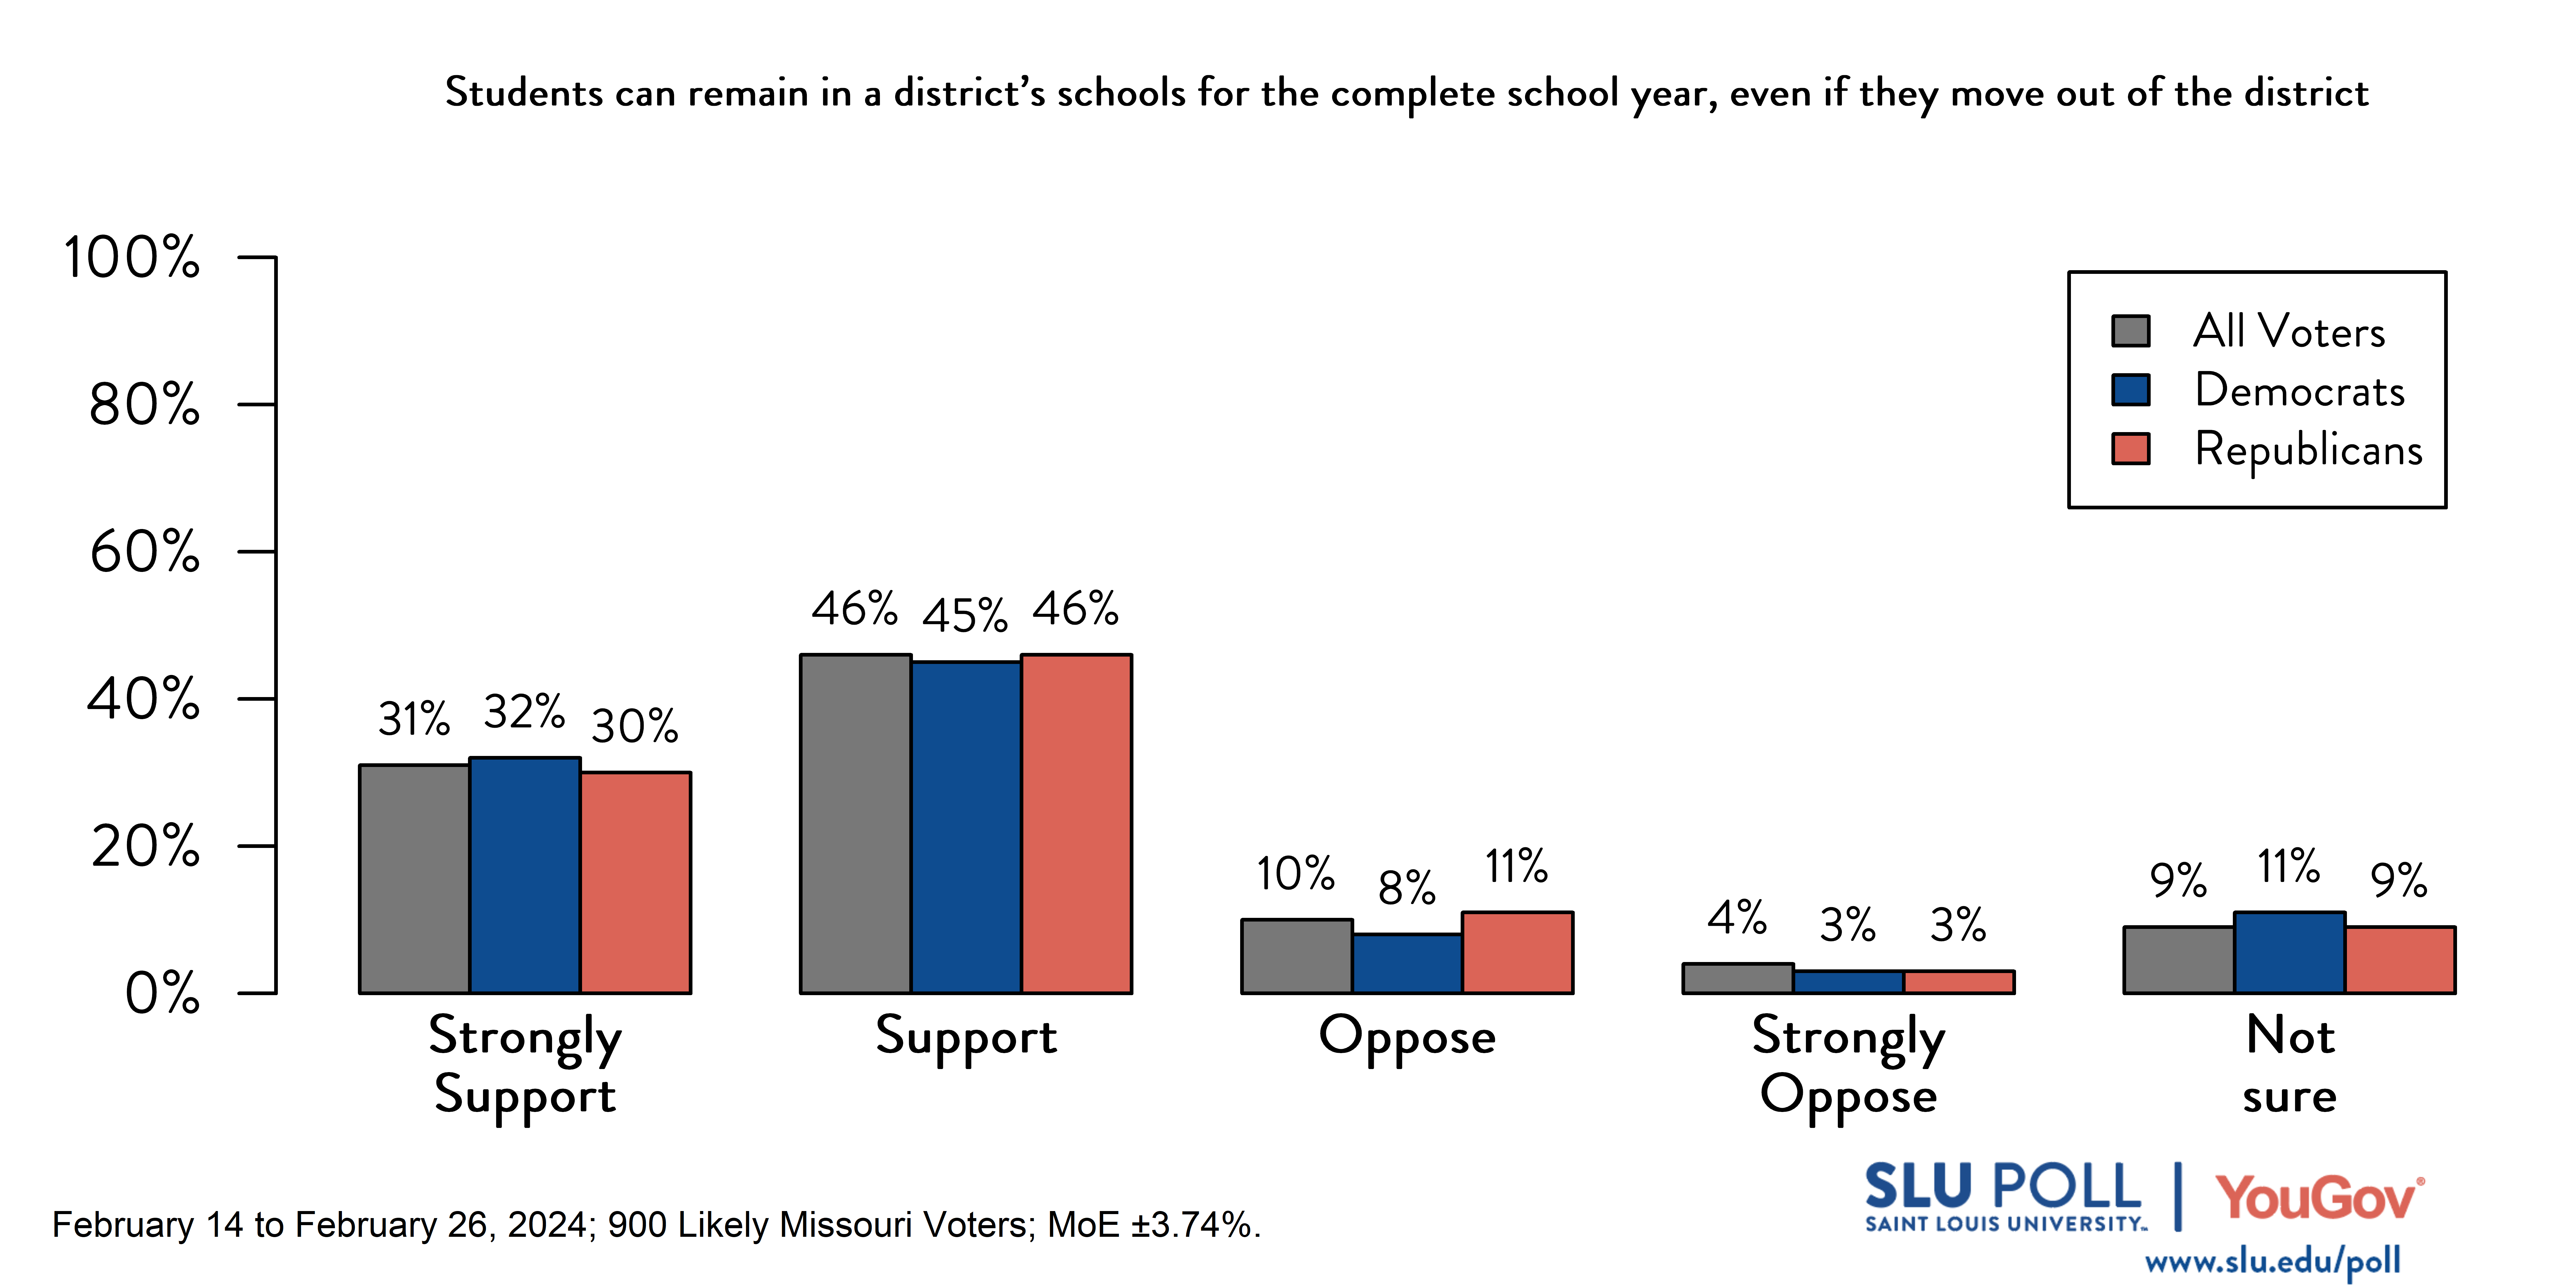 Likely voters' responses to 'Do you support or oppose the following policies…Allow students to enroll in a district's schools to remain in that district's schools for the complete school year, even if they move out of the district during the school year?': 31% Strongly support, 46% Support, 10% Oppose, 4% Strongly oppose, and 9% Not sure. Democratic voters' responses: ' 32% Strongly support, 45% Support, 8% Oppose, 3% Strongly oppose, and 11% Not sure. Republican voters' responses:  30% Strongly support, 46% Support, 11% Oppose, 3% Strongly oppose, and 9% Not sure.